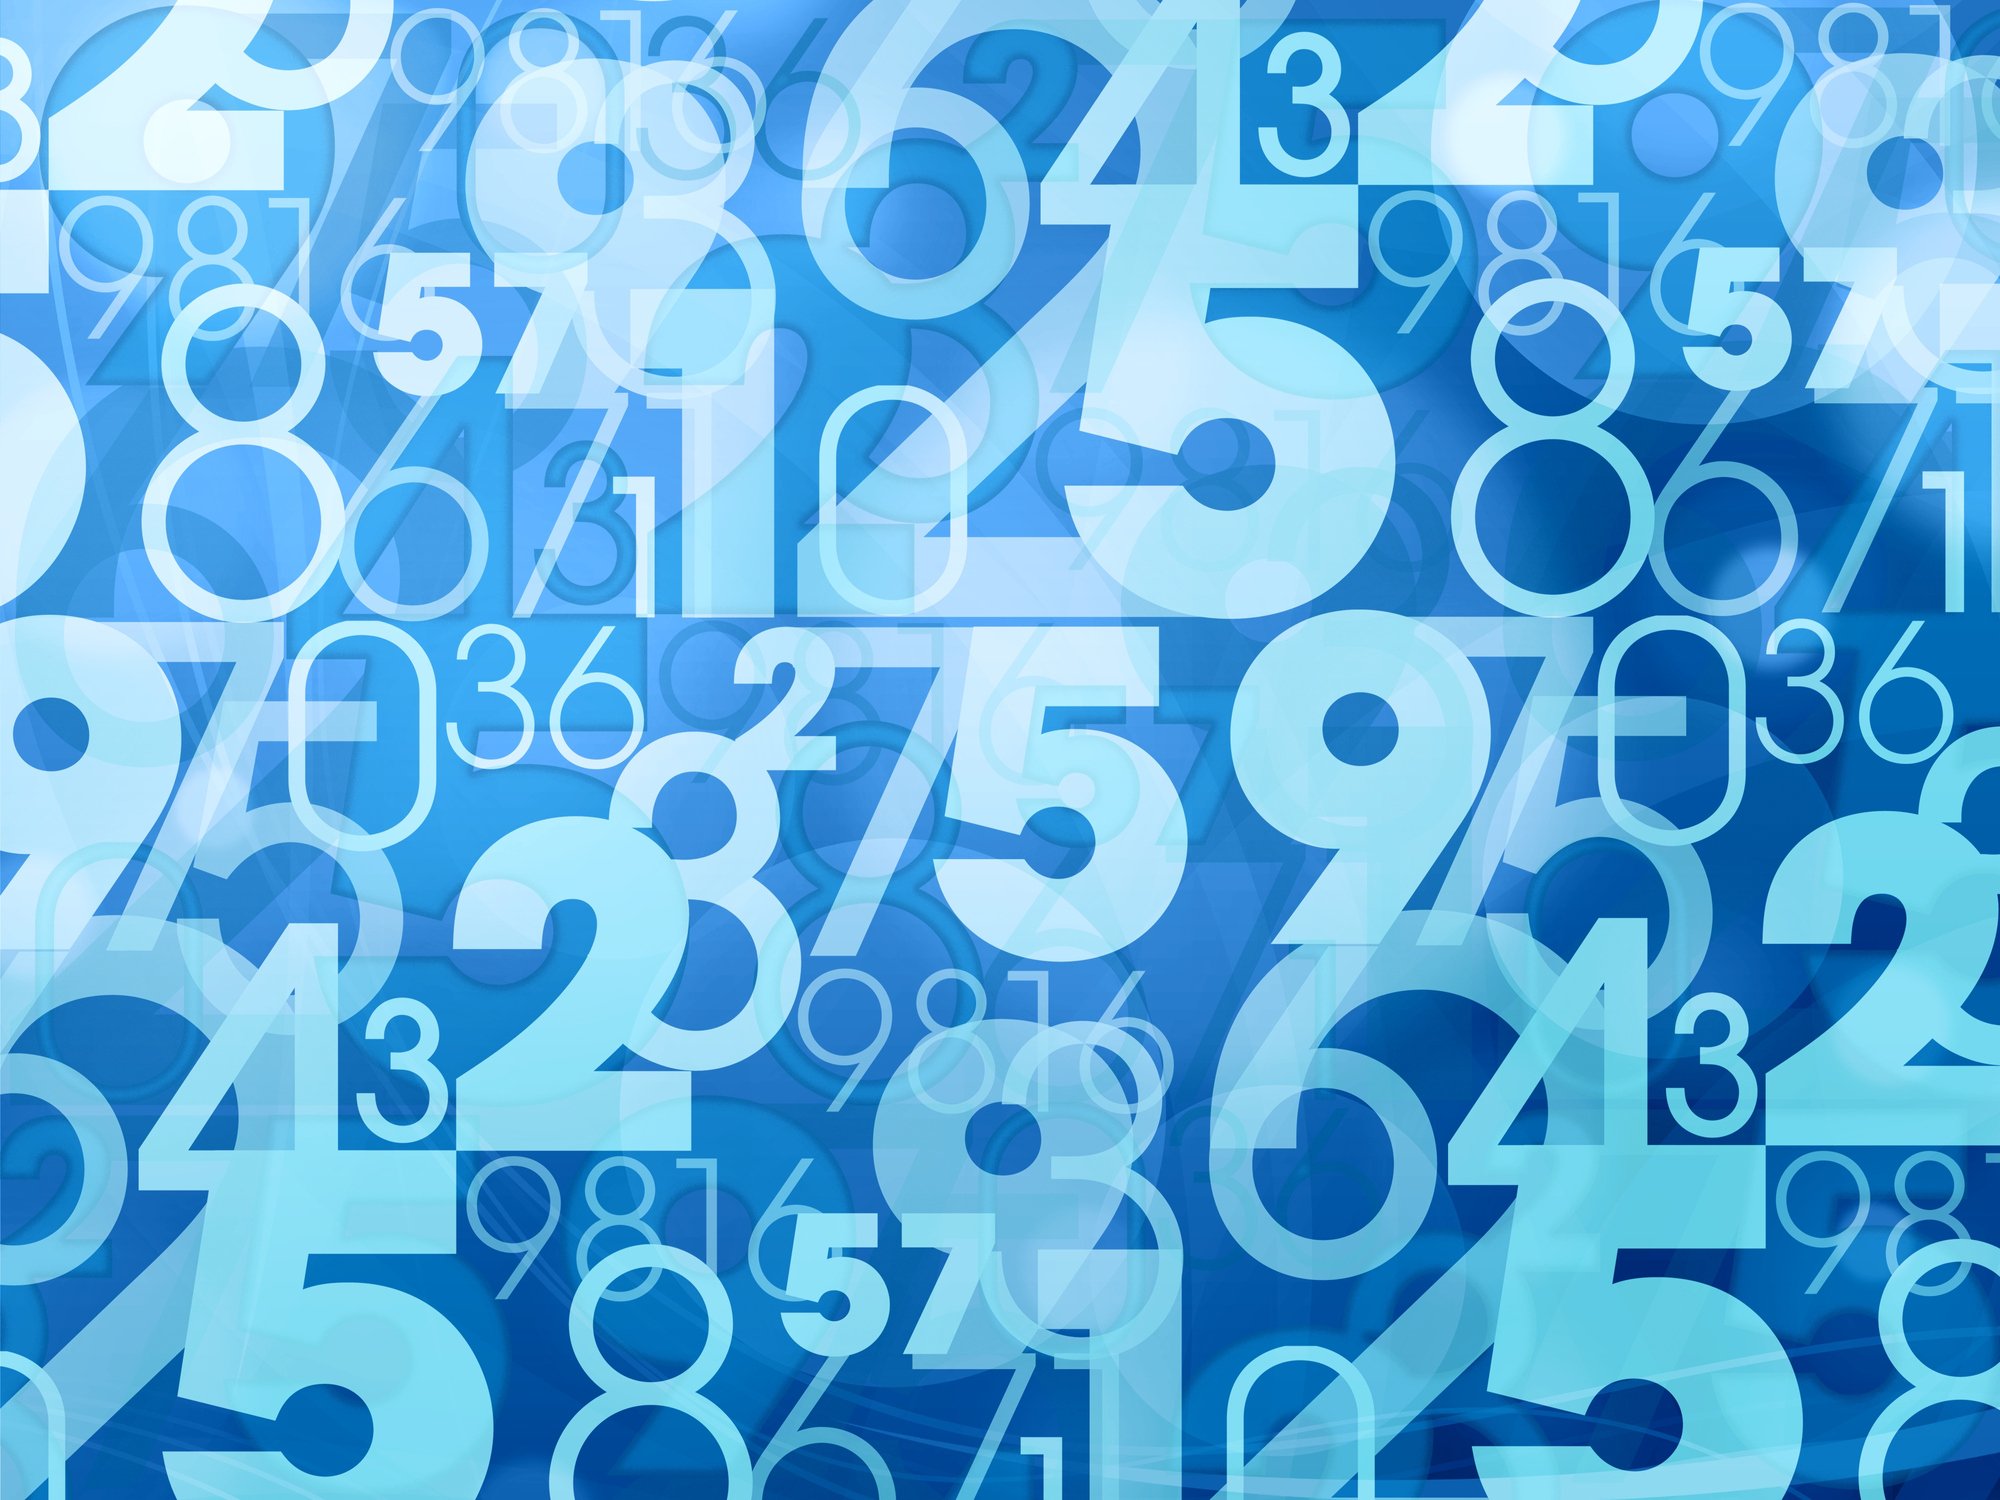 An abstract blue pattern with numbers